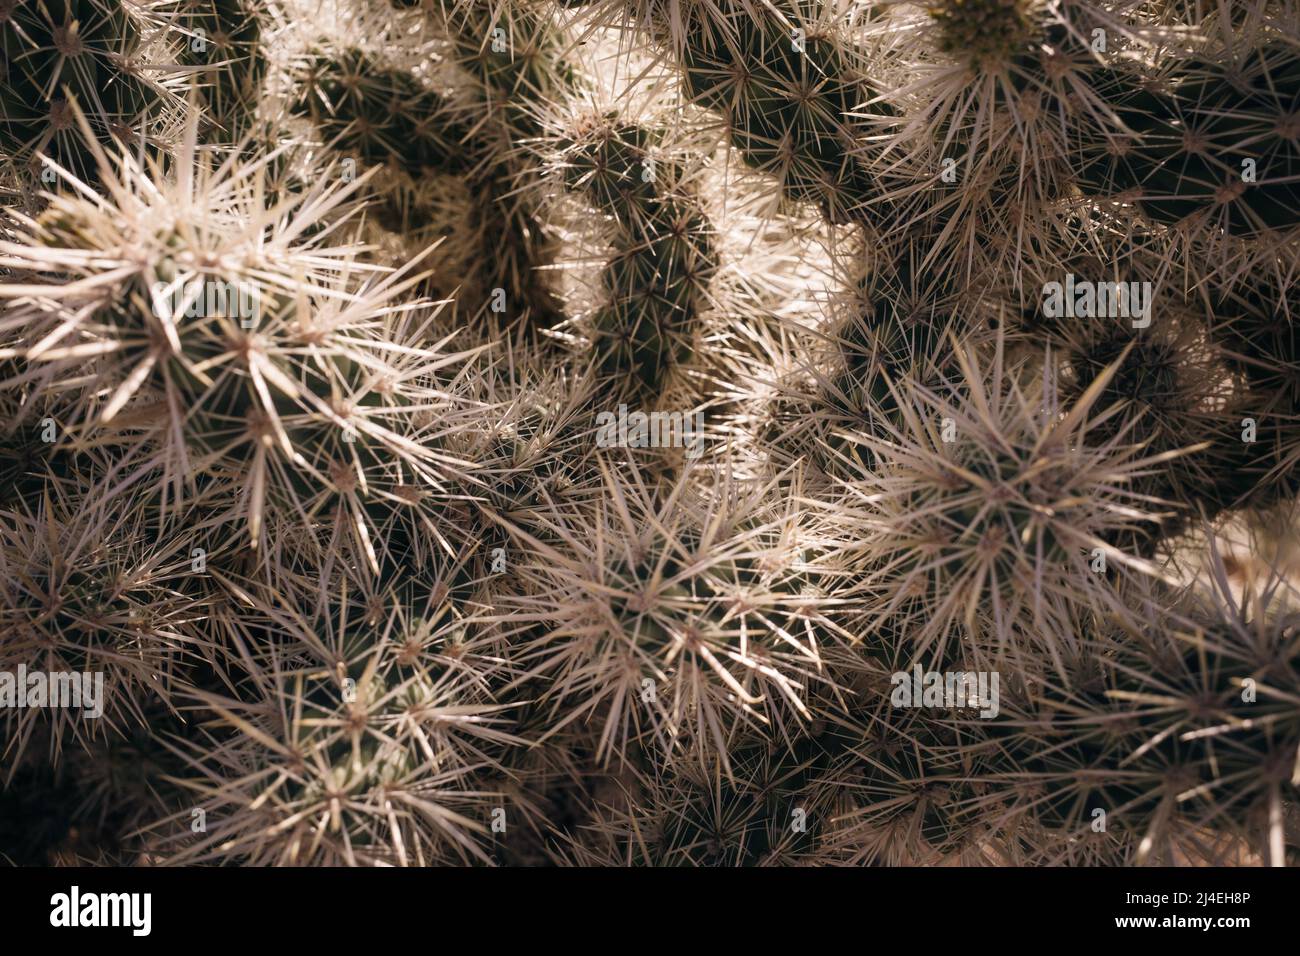 Cactus flower in bloom in Joshua Tree National Park, southern California. High quality photo Stock Photo